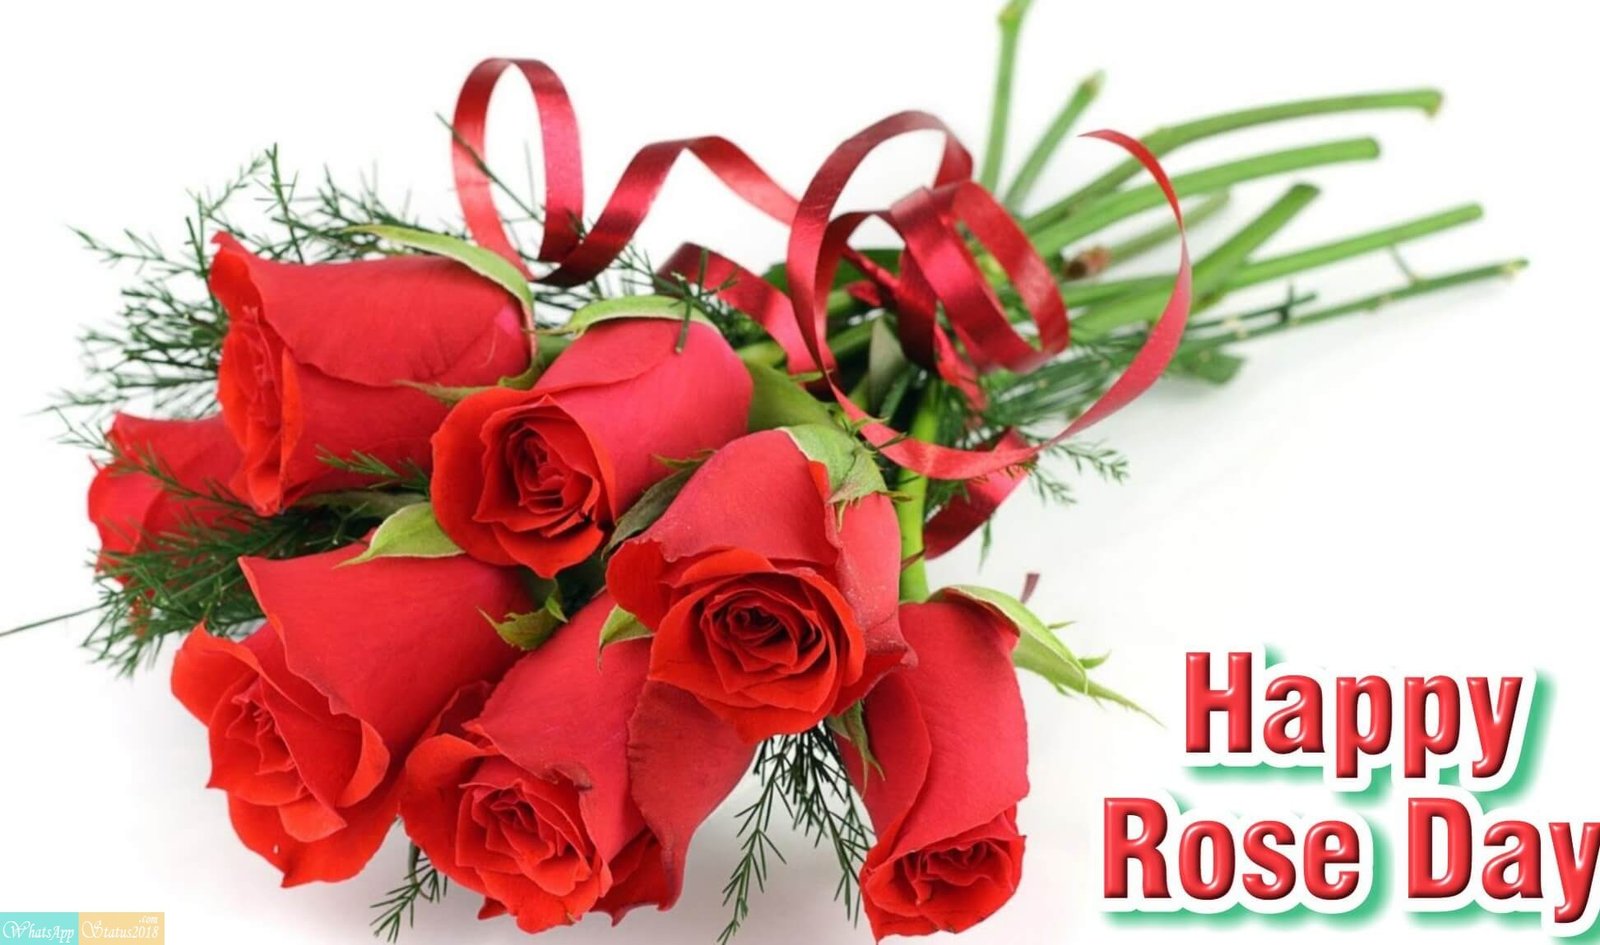 Happy Rose Day images, Beautiful flowers